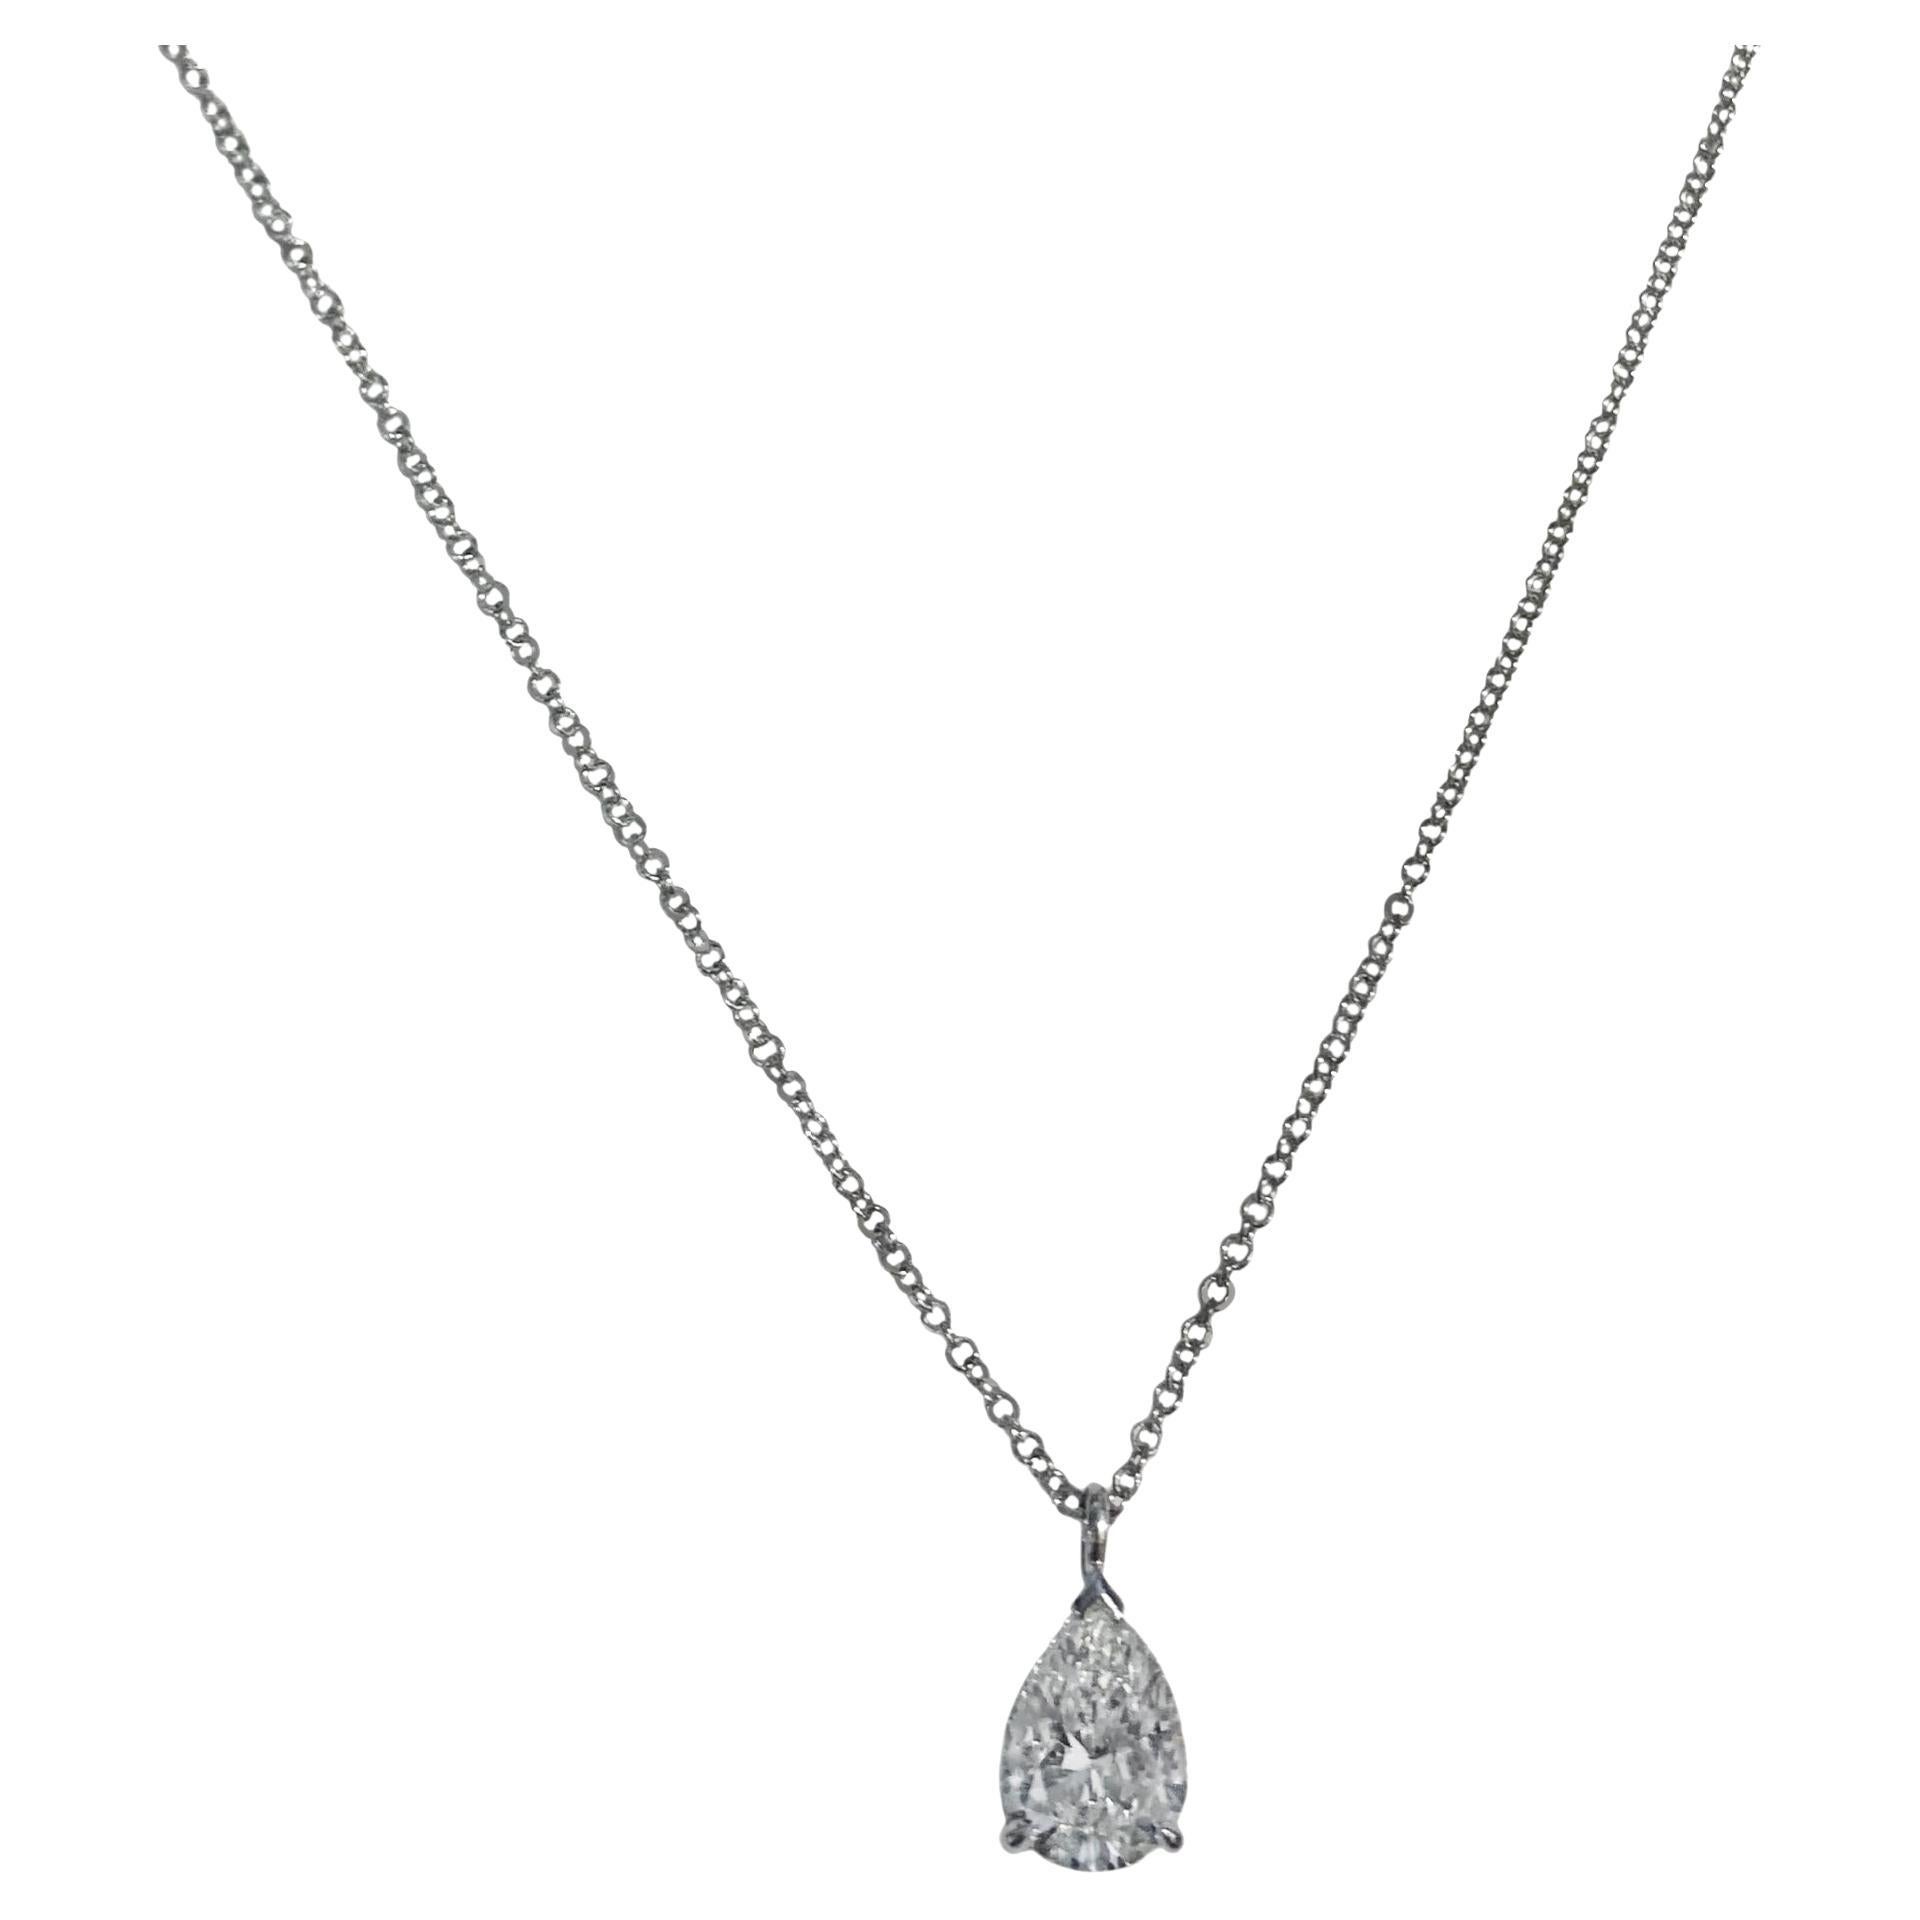 Tiffany & Co. Platinum Pear Shaped Diamond Necklace For Sale